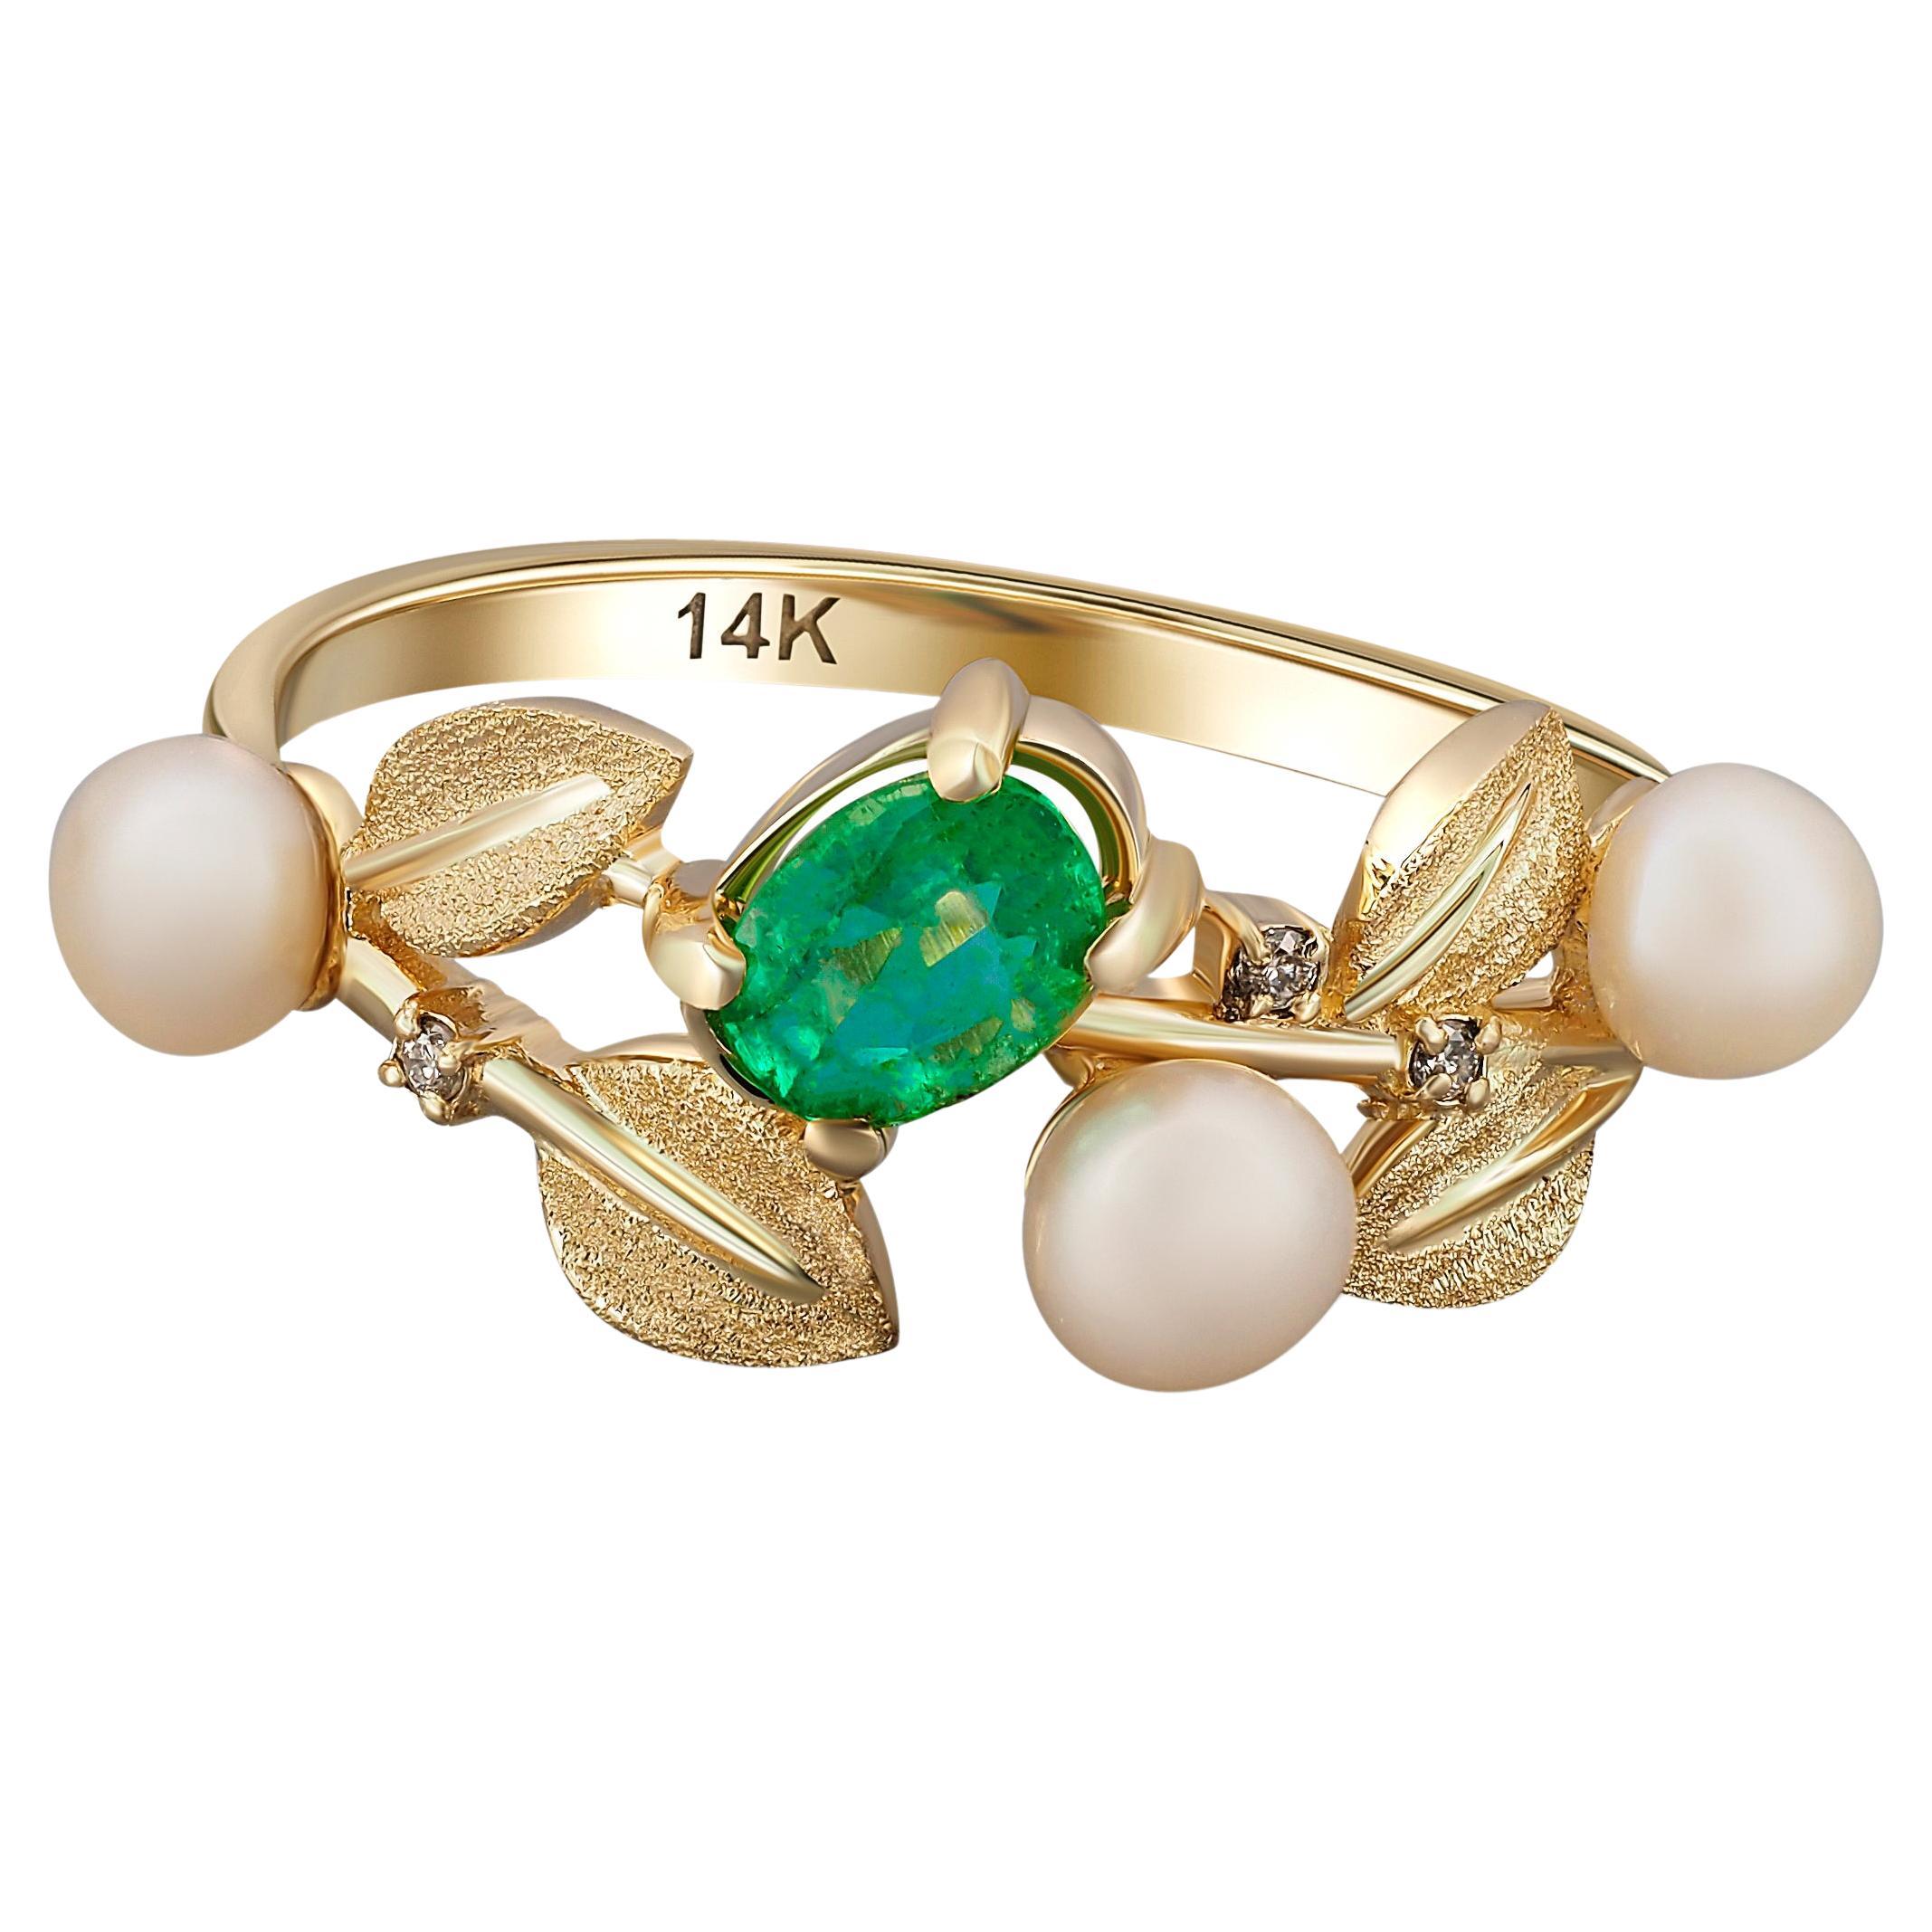 Flower ring with emerald in 14k gold.  For Sale